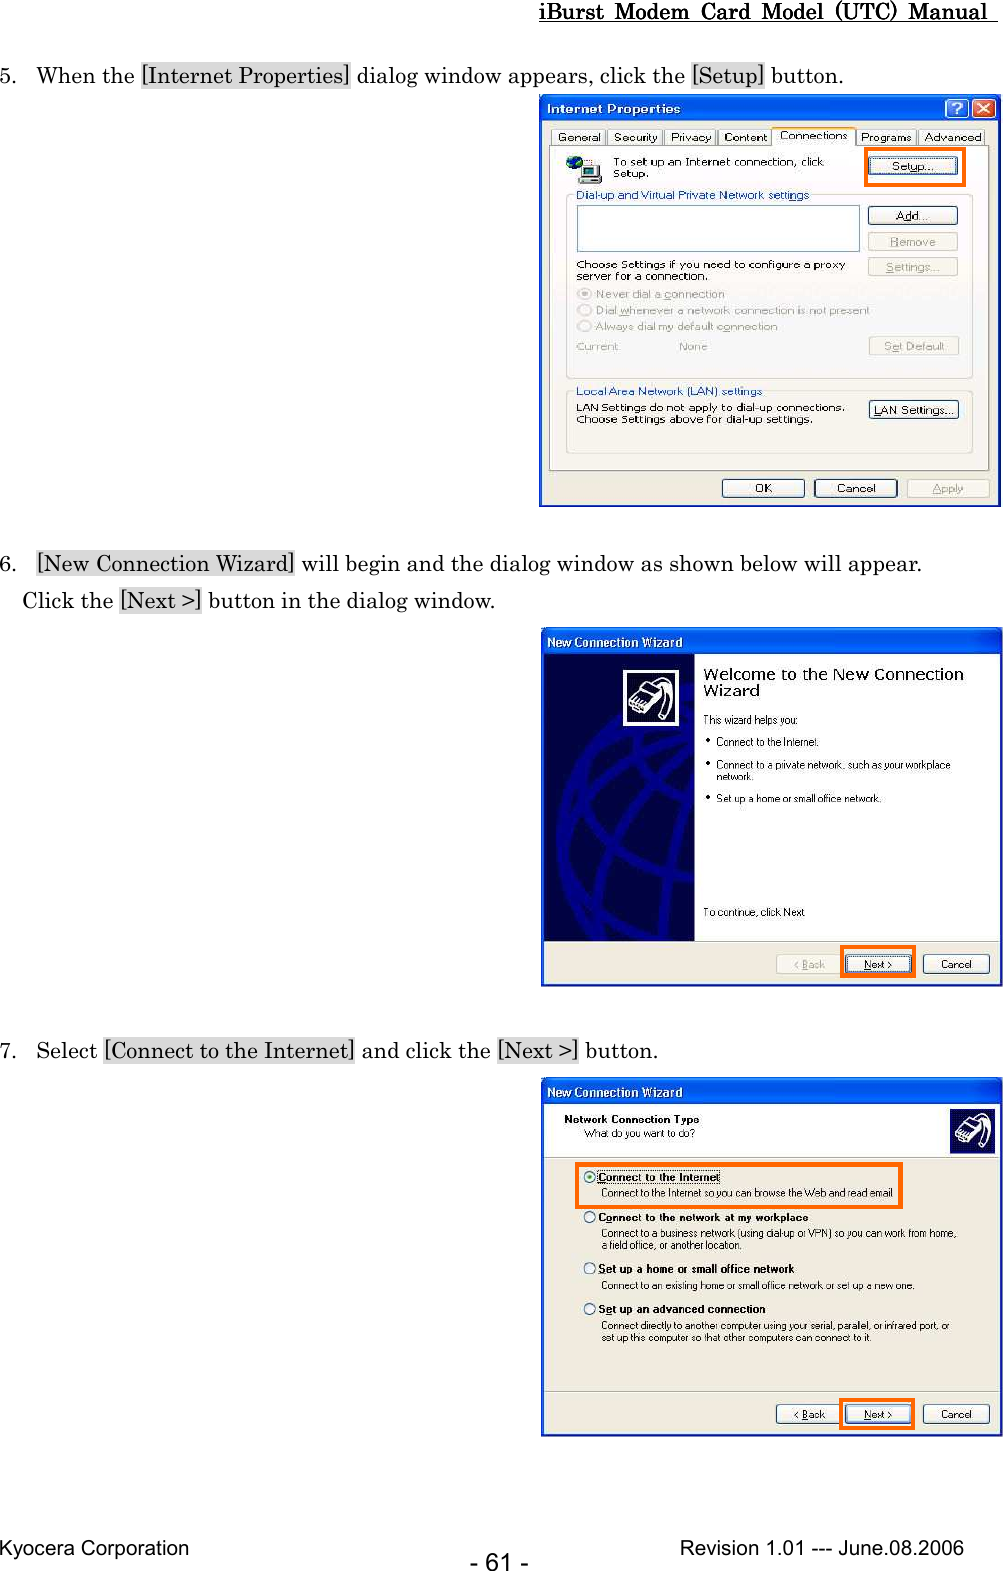 iBurst  Modem  Card  Model  (UTC)  Manual iBurst  Modem  Card  Model  (UTC)  Manual iBurst  Modem  Card  Model  (UTC)  Manual iBurst  Modem  Card  Model  (UTC)  Manual       Kyocera Corporation                                                                                              Revision 1.01 --- June.08.2006 - 61 - 5. When the [Internet Properties] dialog window appears, click the [Setup] button.   6. [New Connection Wizard] will begin and the dialog window as shown below will appear. Click the [Next &gt;] button in the dialog window.   7. Select [Connect to the Internet] and click the [Next &gt;] button.    